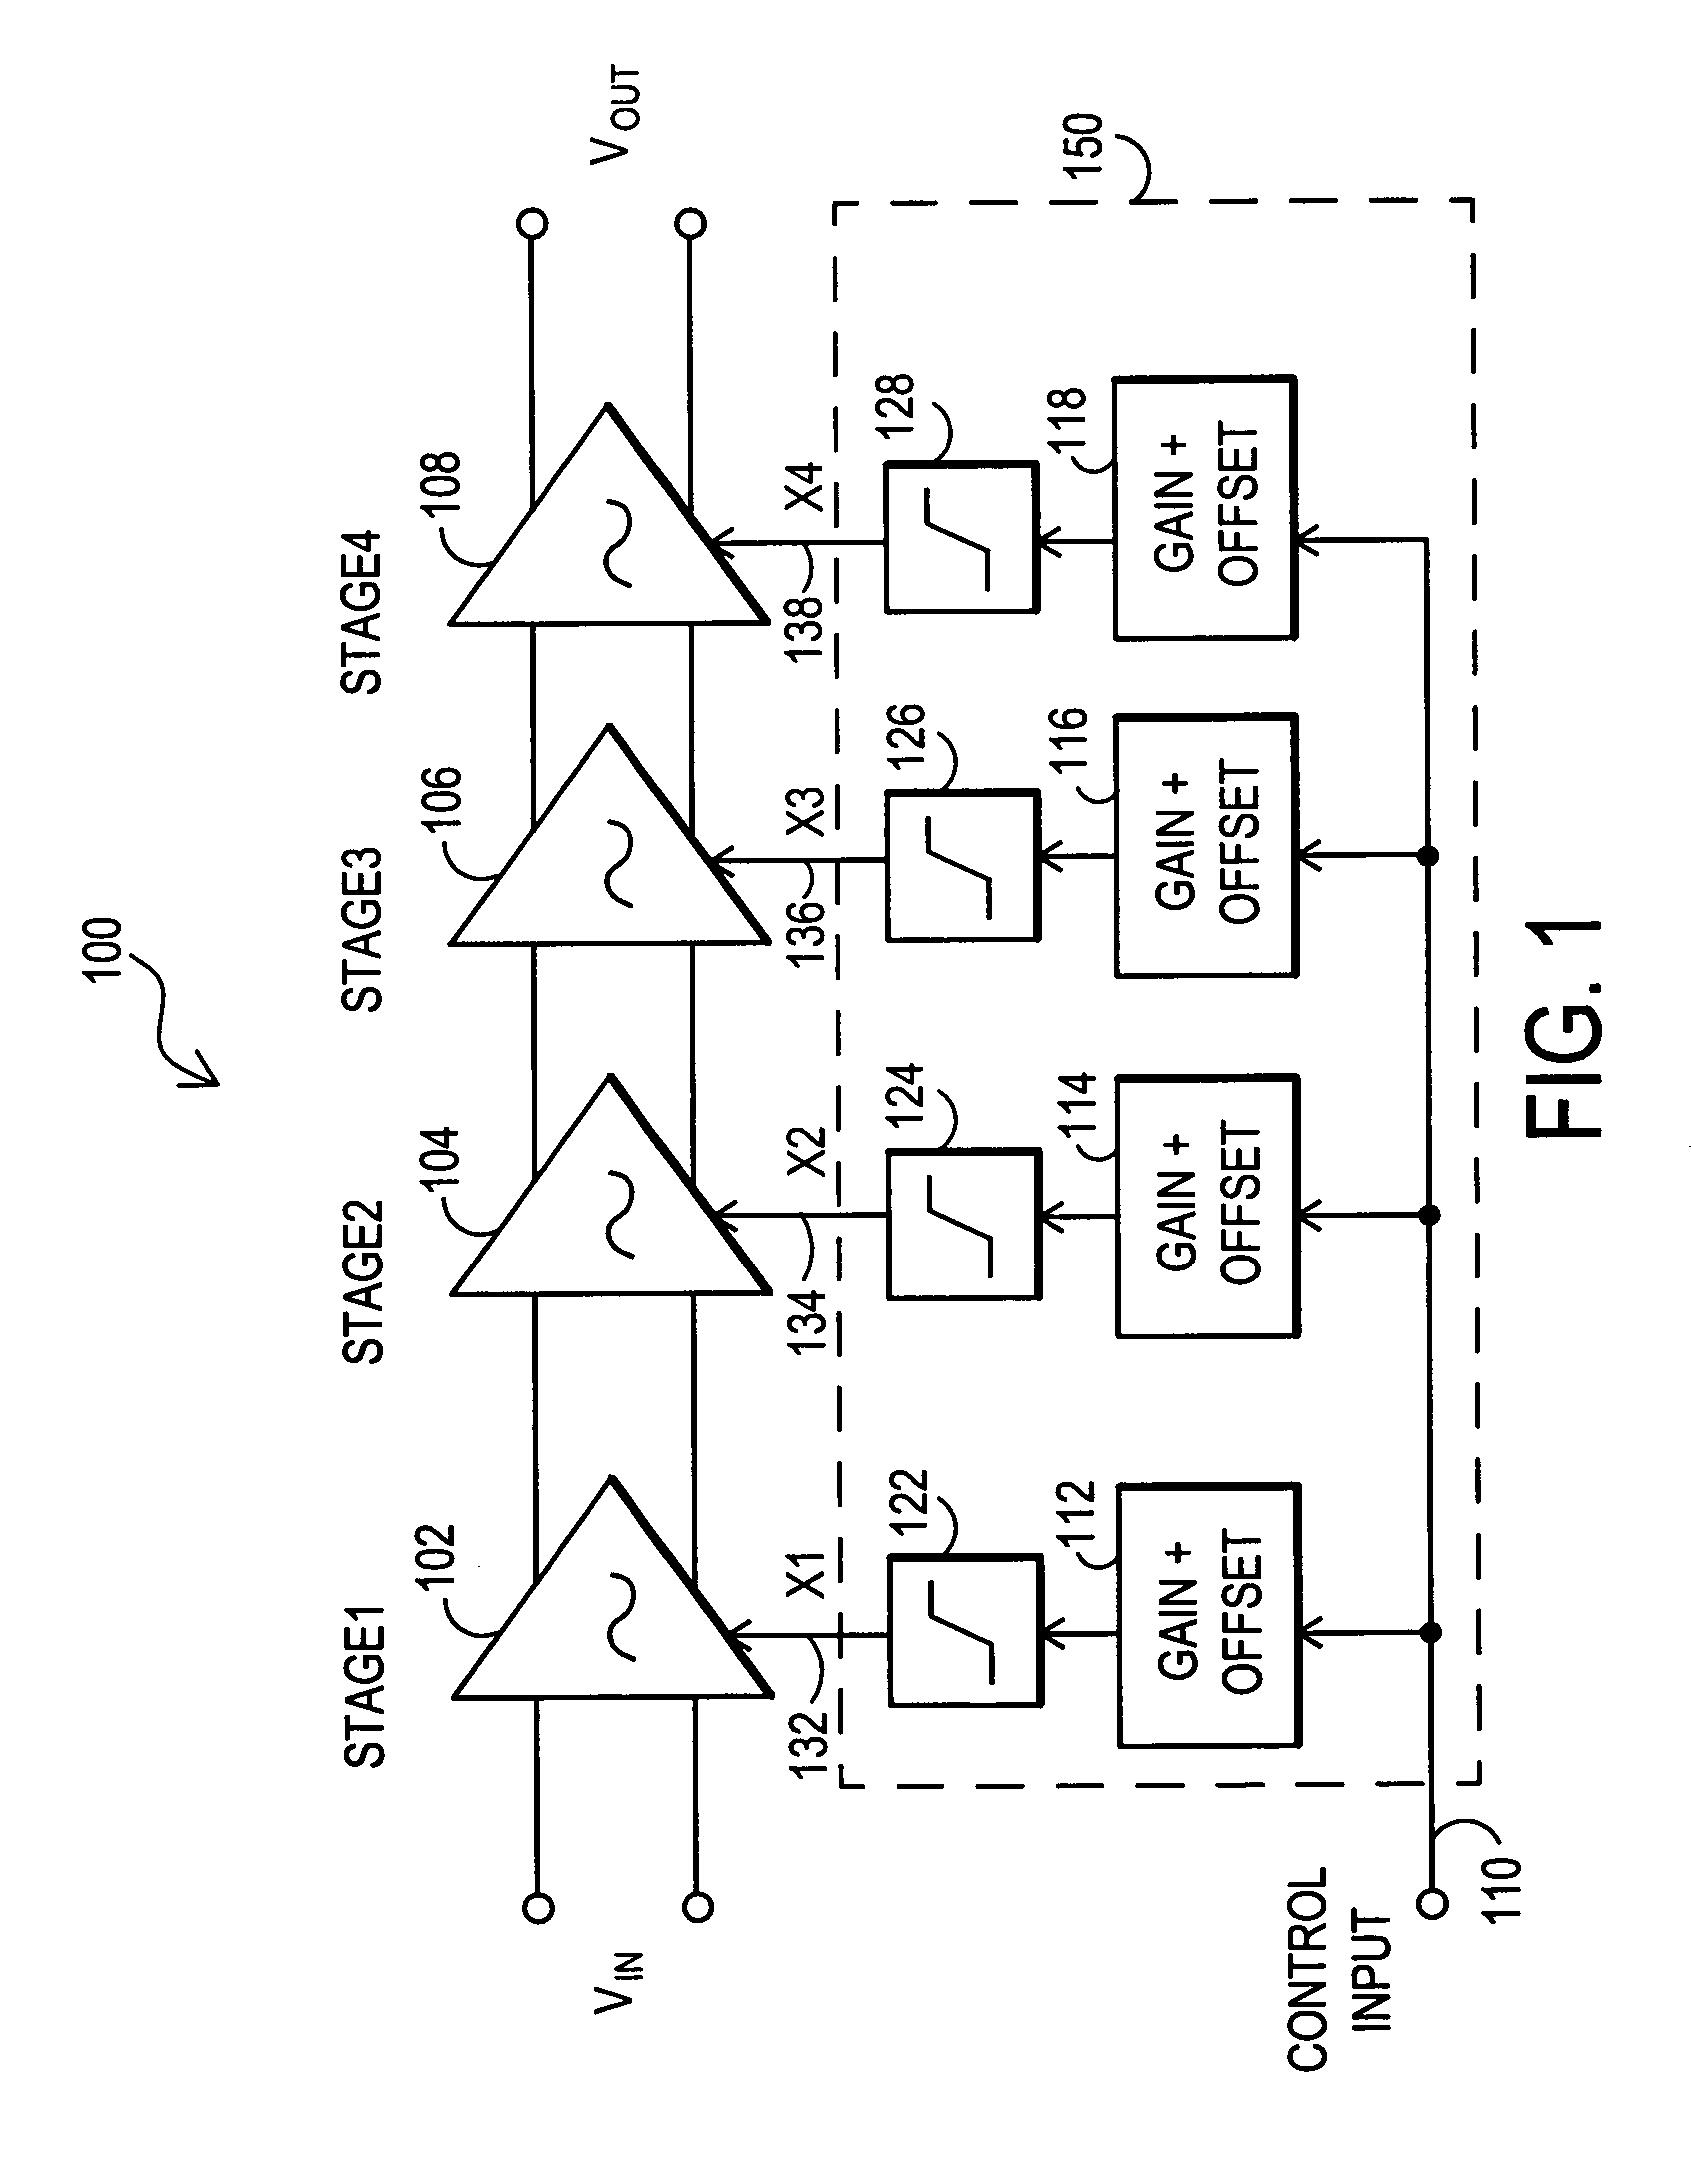 Multi-stage variable gain amplifier utilizing overlapping gain curves to compensate for log-linear errors